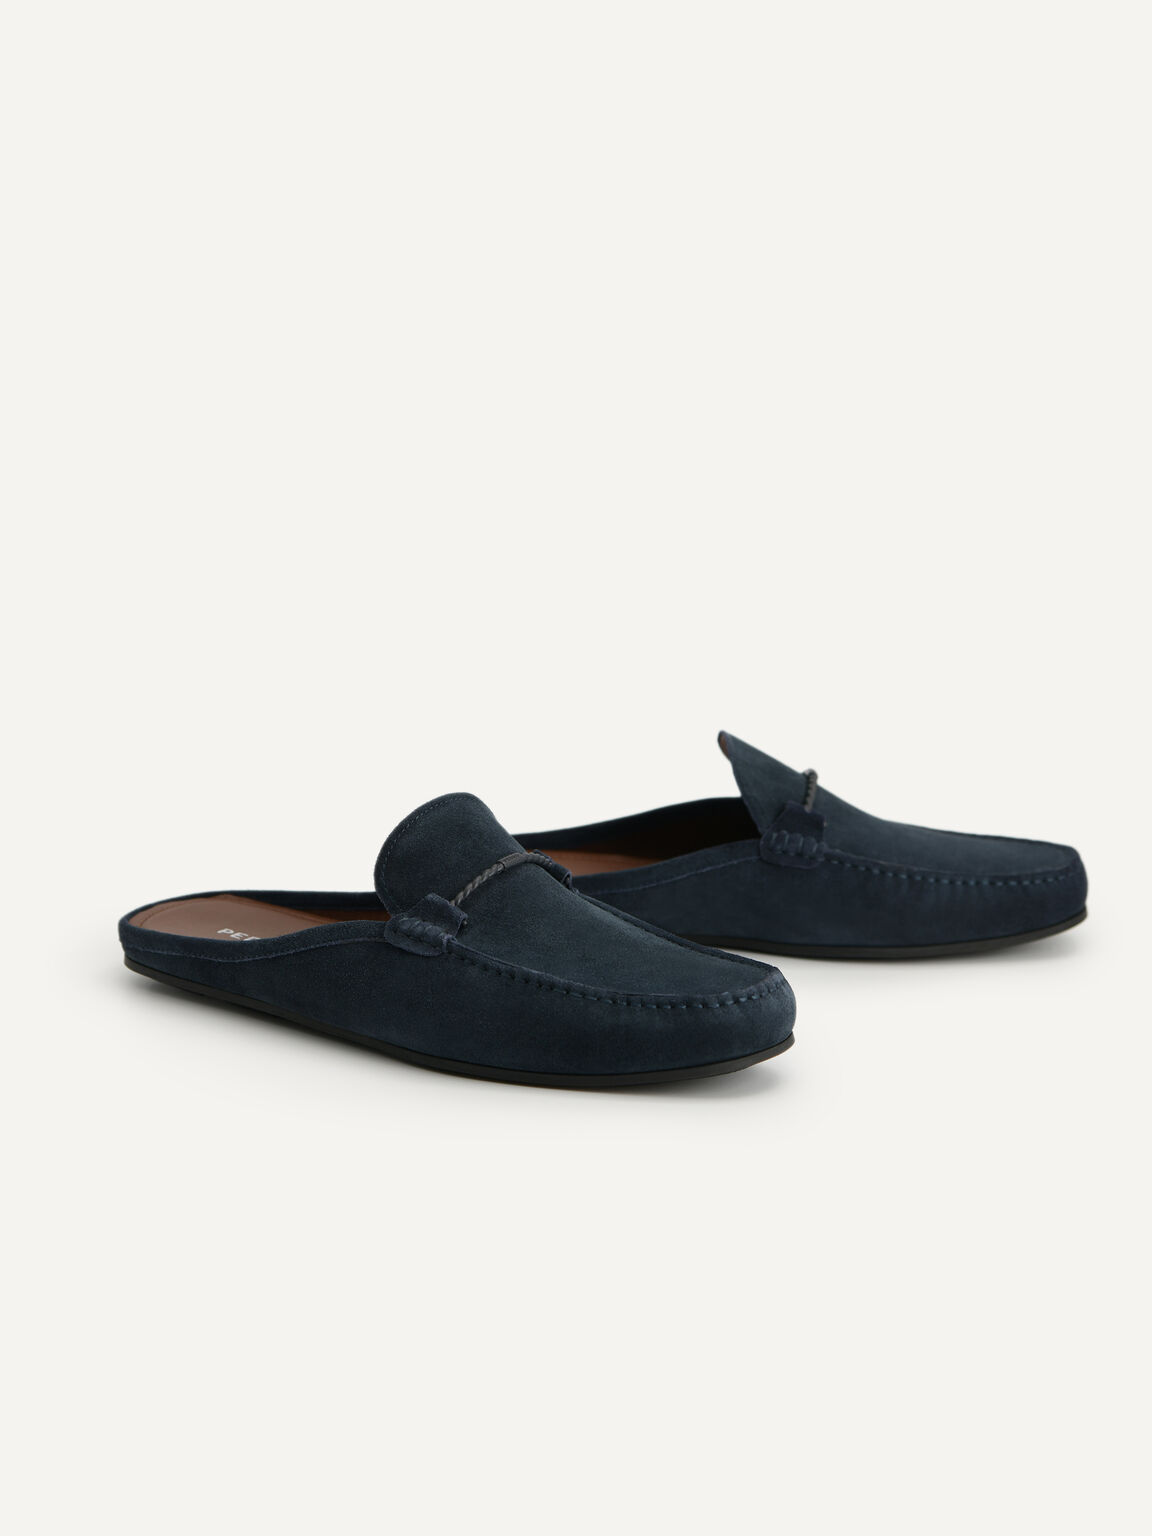 Leather Slip-On Driving Shoe, Navy, hi-res